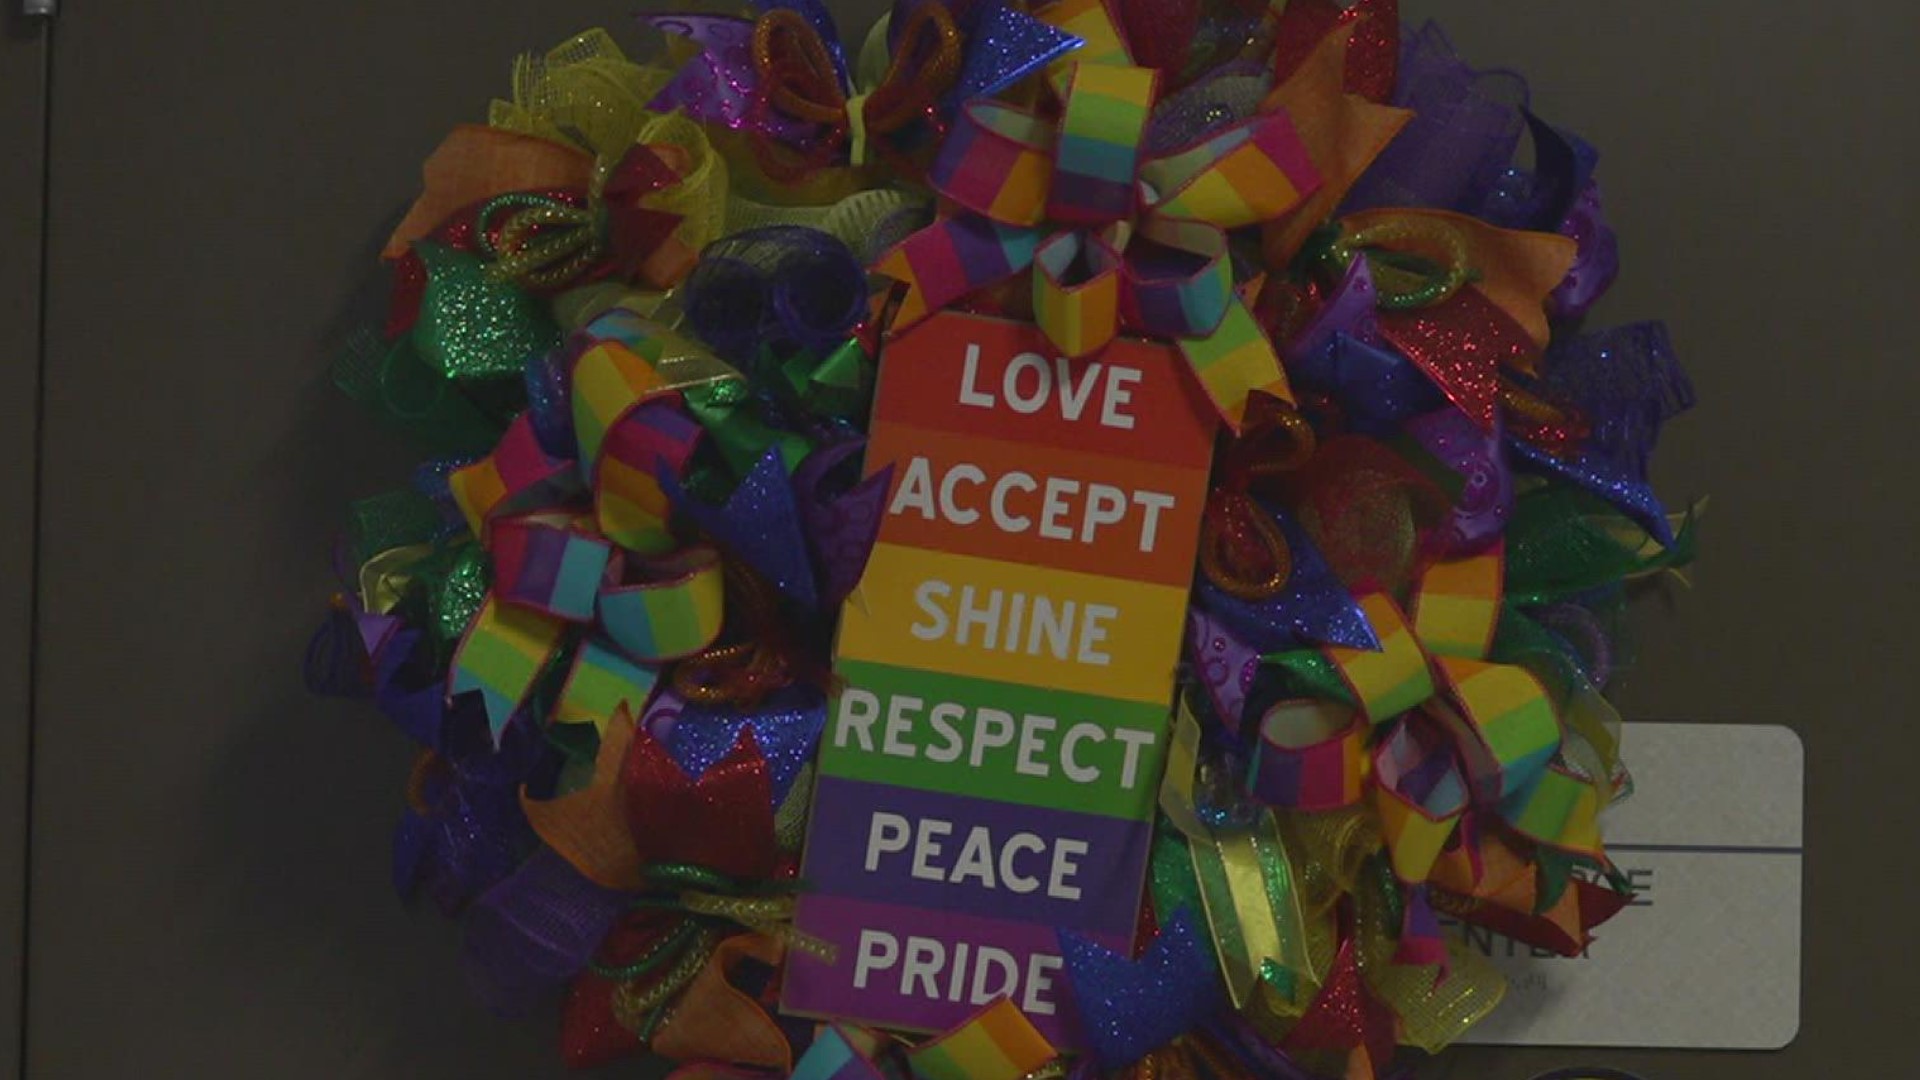 Throughout this month there are many pride events taking place. The coastal bend pride center has not only events but provides resources and support year round.